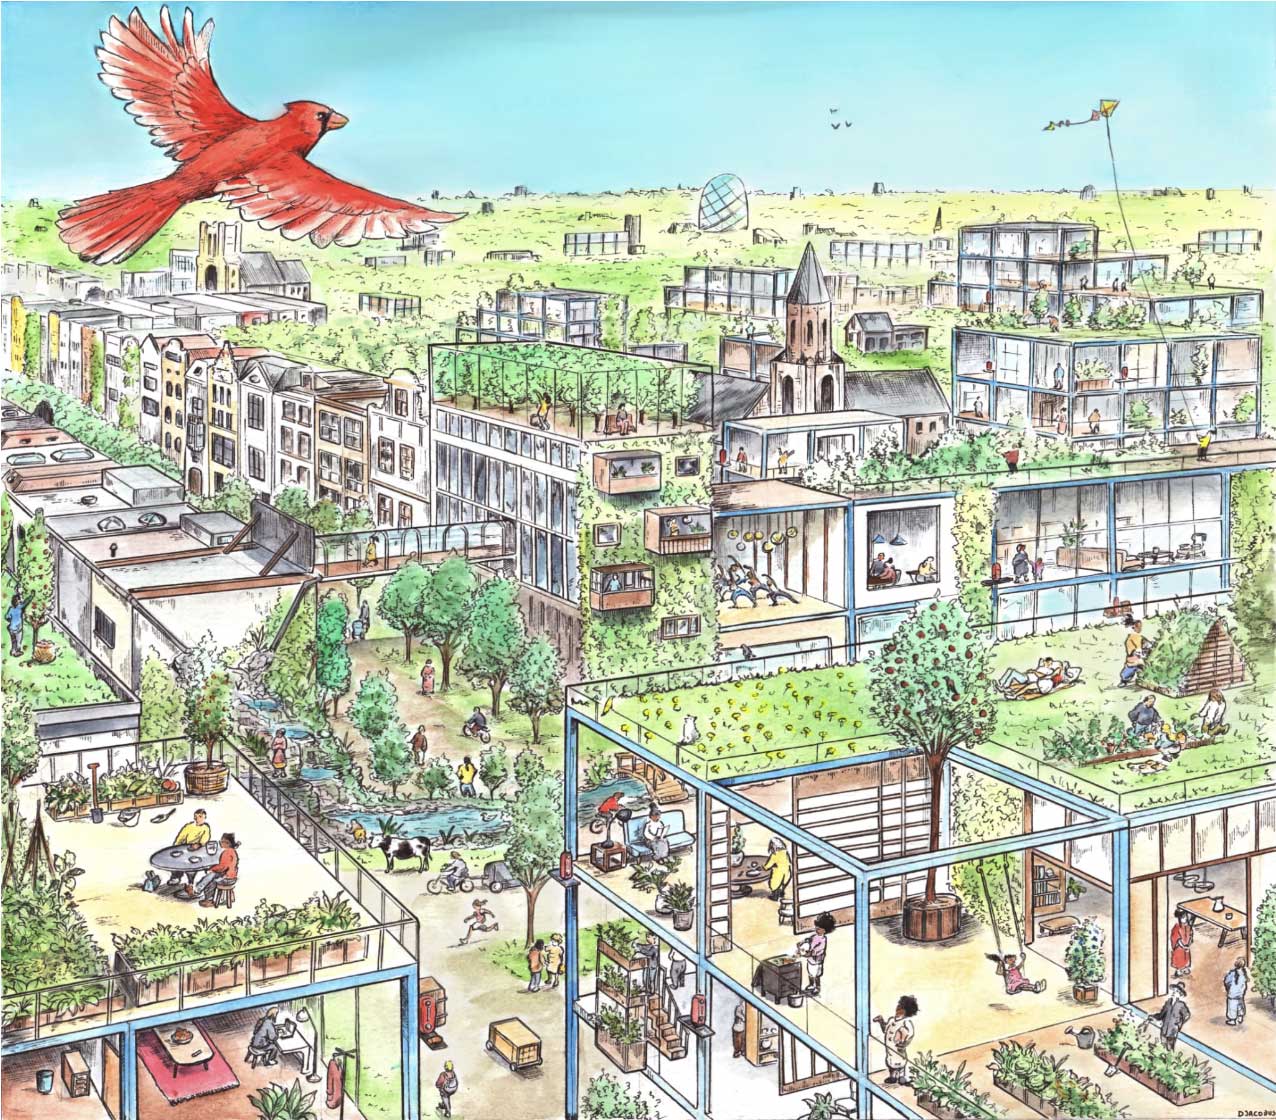 Hand-drawn illustration shows a red bird in the top left corner, flying over a city with angular buildings covered in greenery with citizens outside as part of nature.